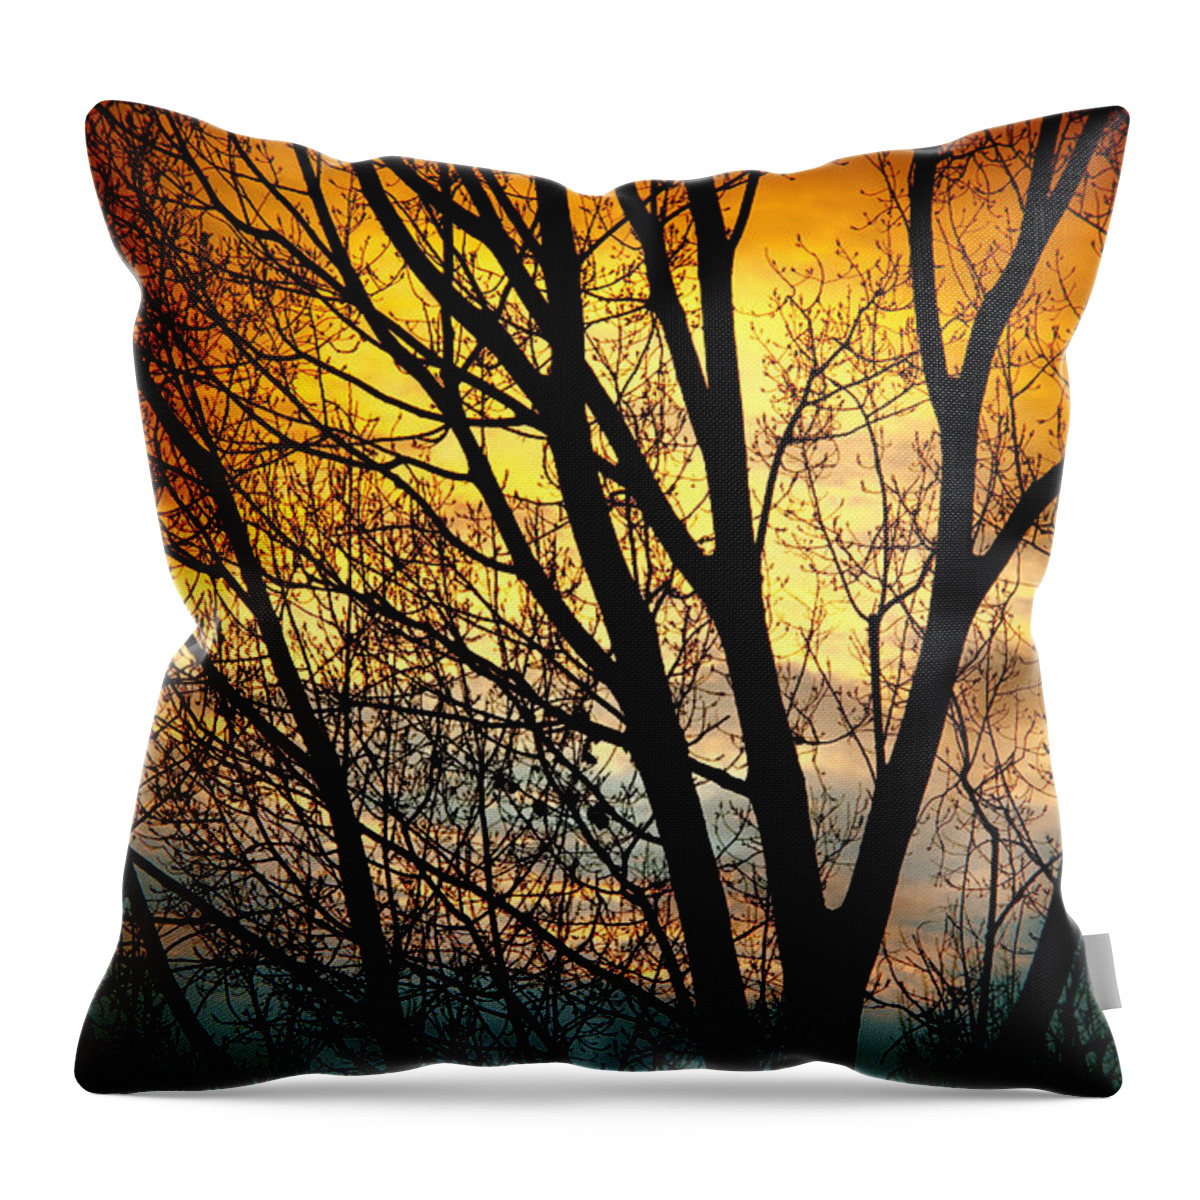 Sunsets Throw Pillow featuring the photograph Colorful Sunset Silhouette by James BO Insogna